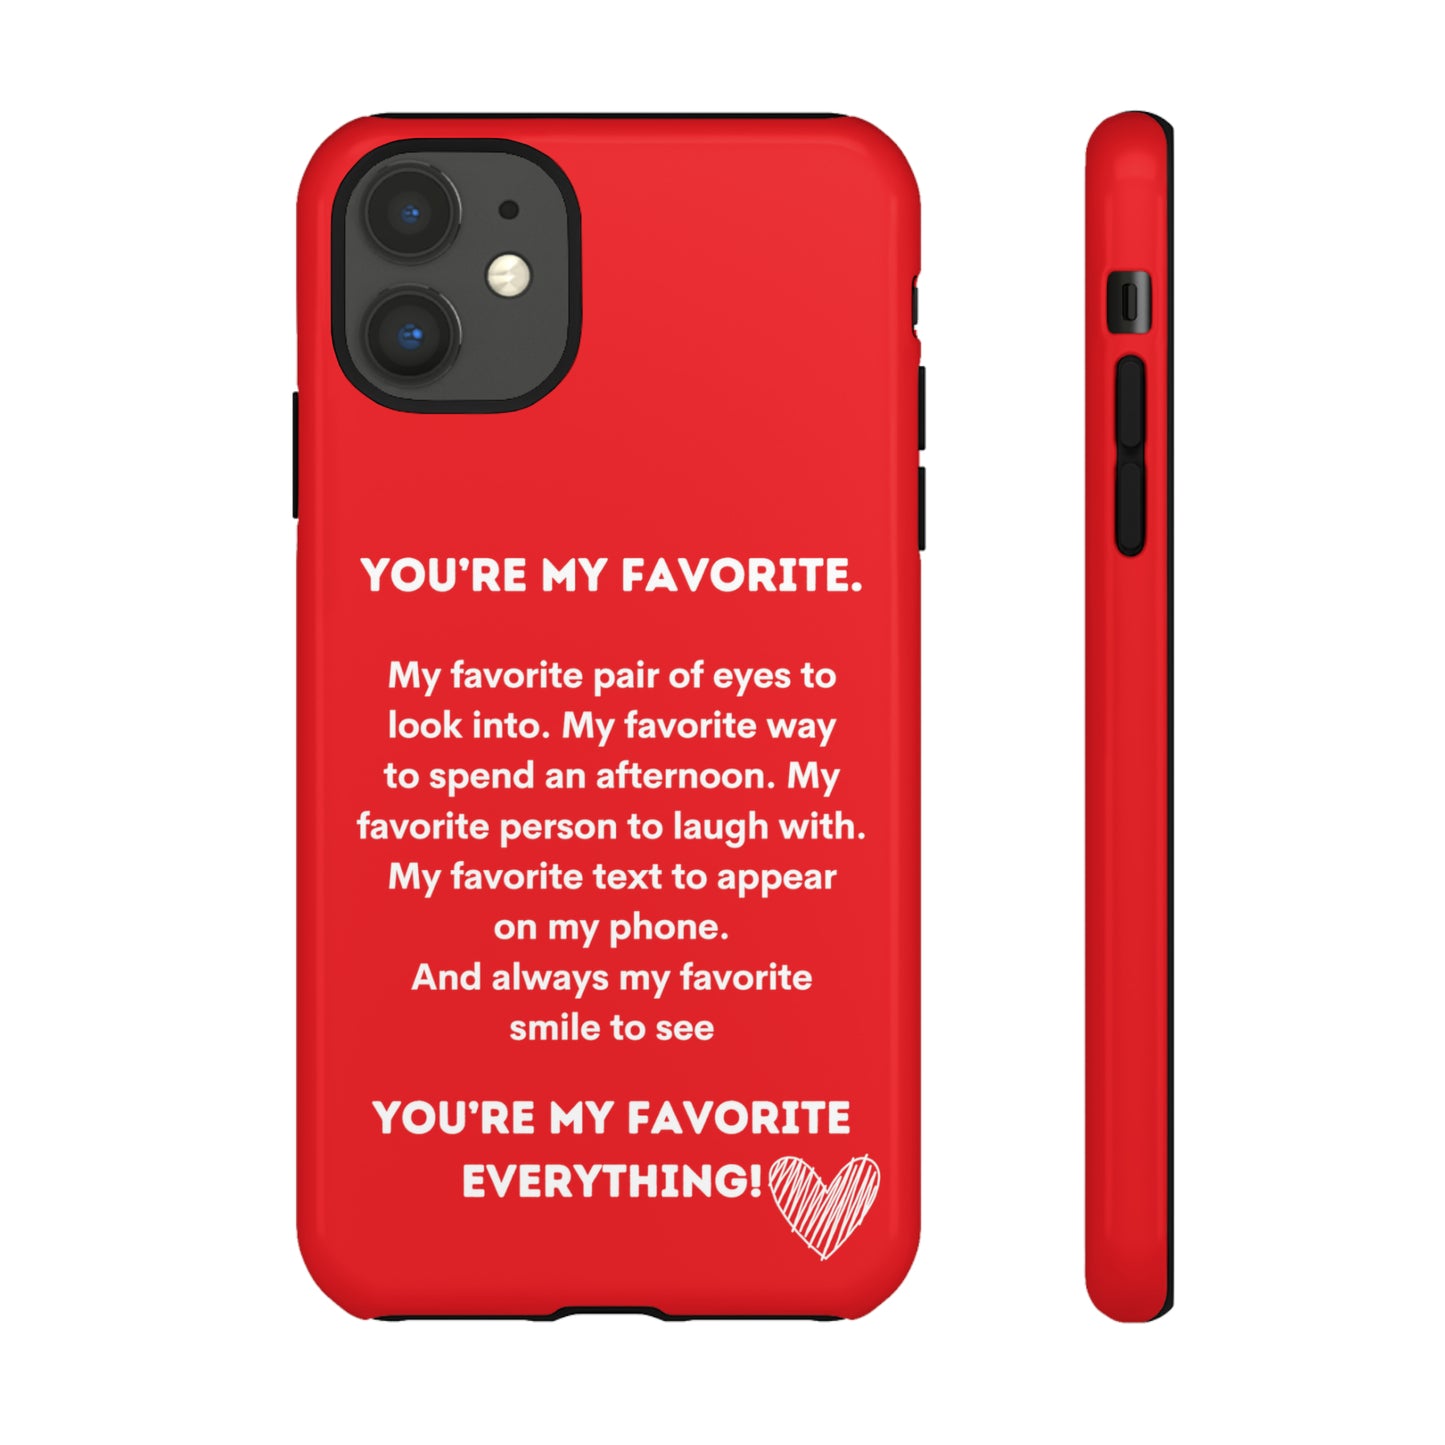 You're My Favorite Everything!  Phone Case